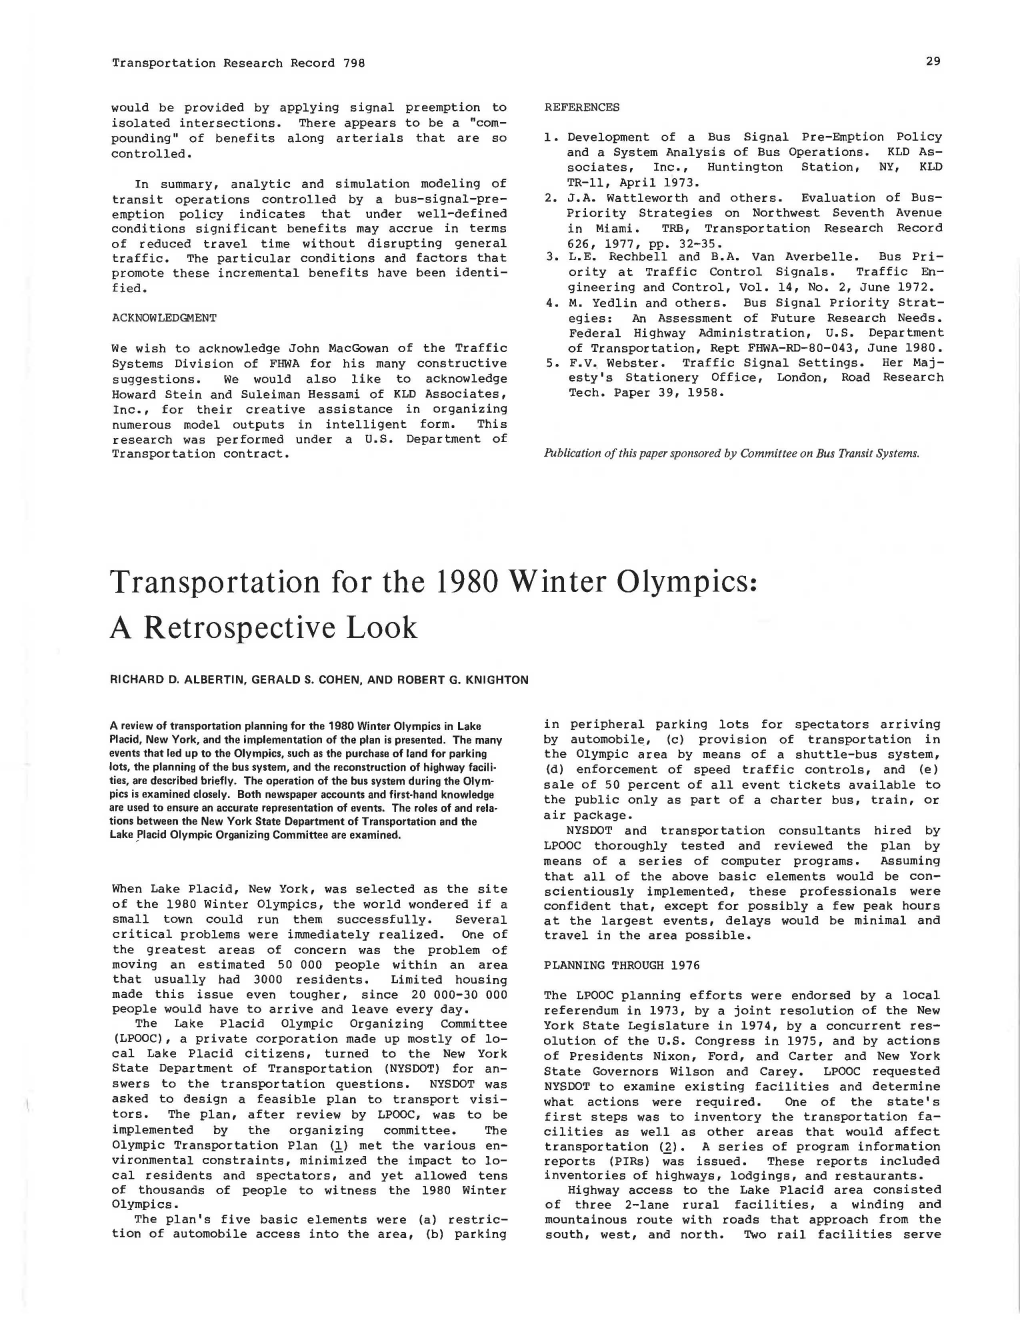 Transportation for the 1980 Winter Olympics: A